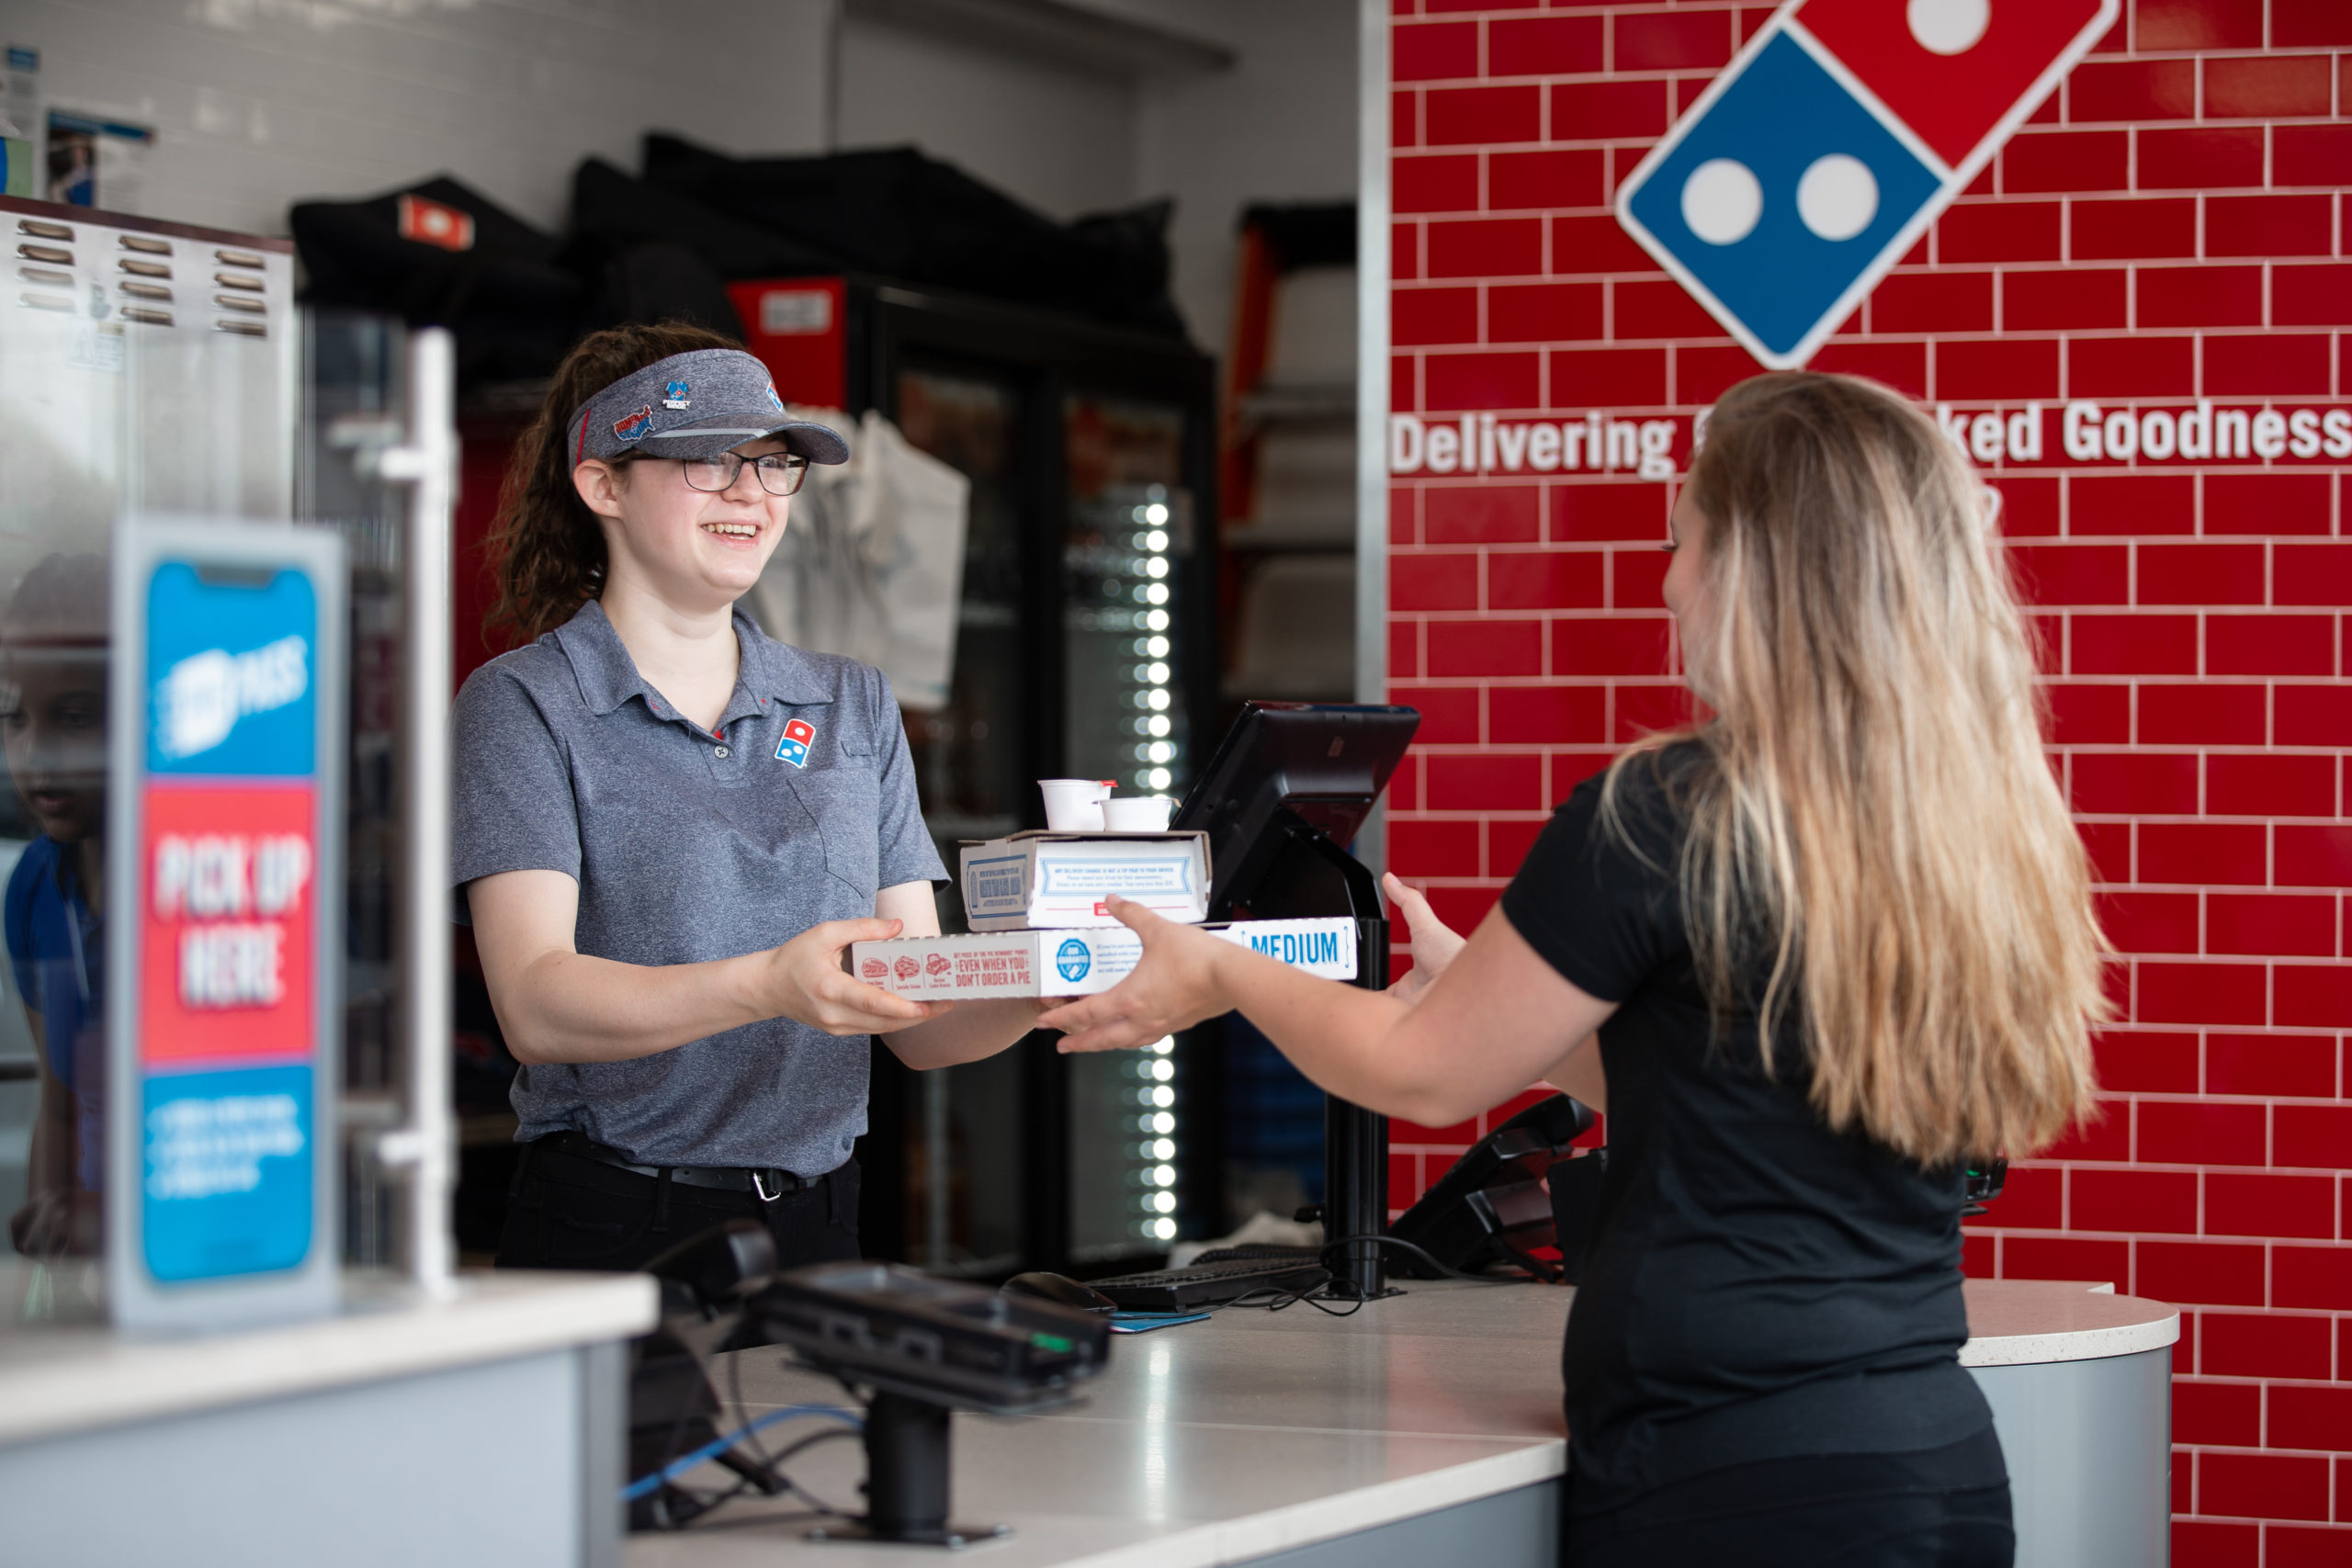 Domino’s Offers $3 &#8220;Tip&#8221; for Carryout Instead of Delivery   